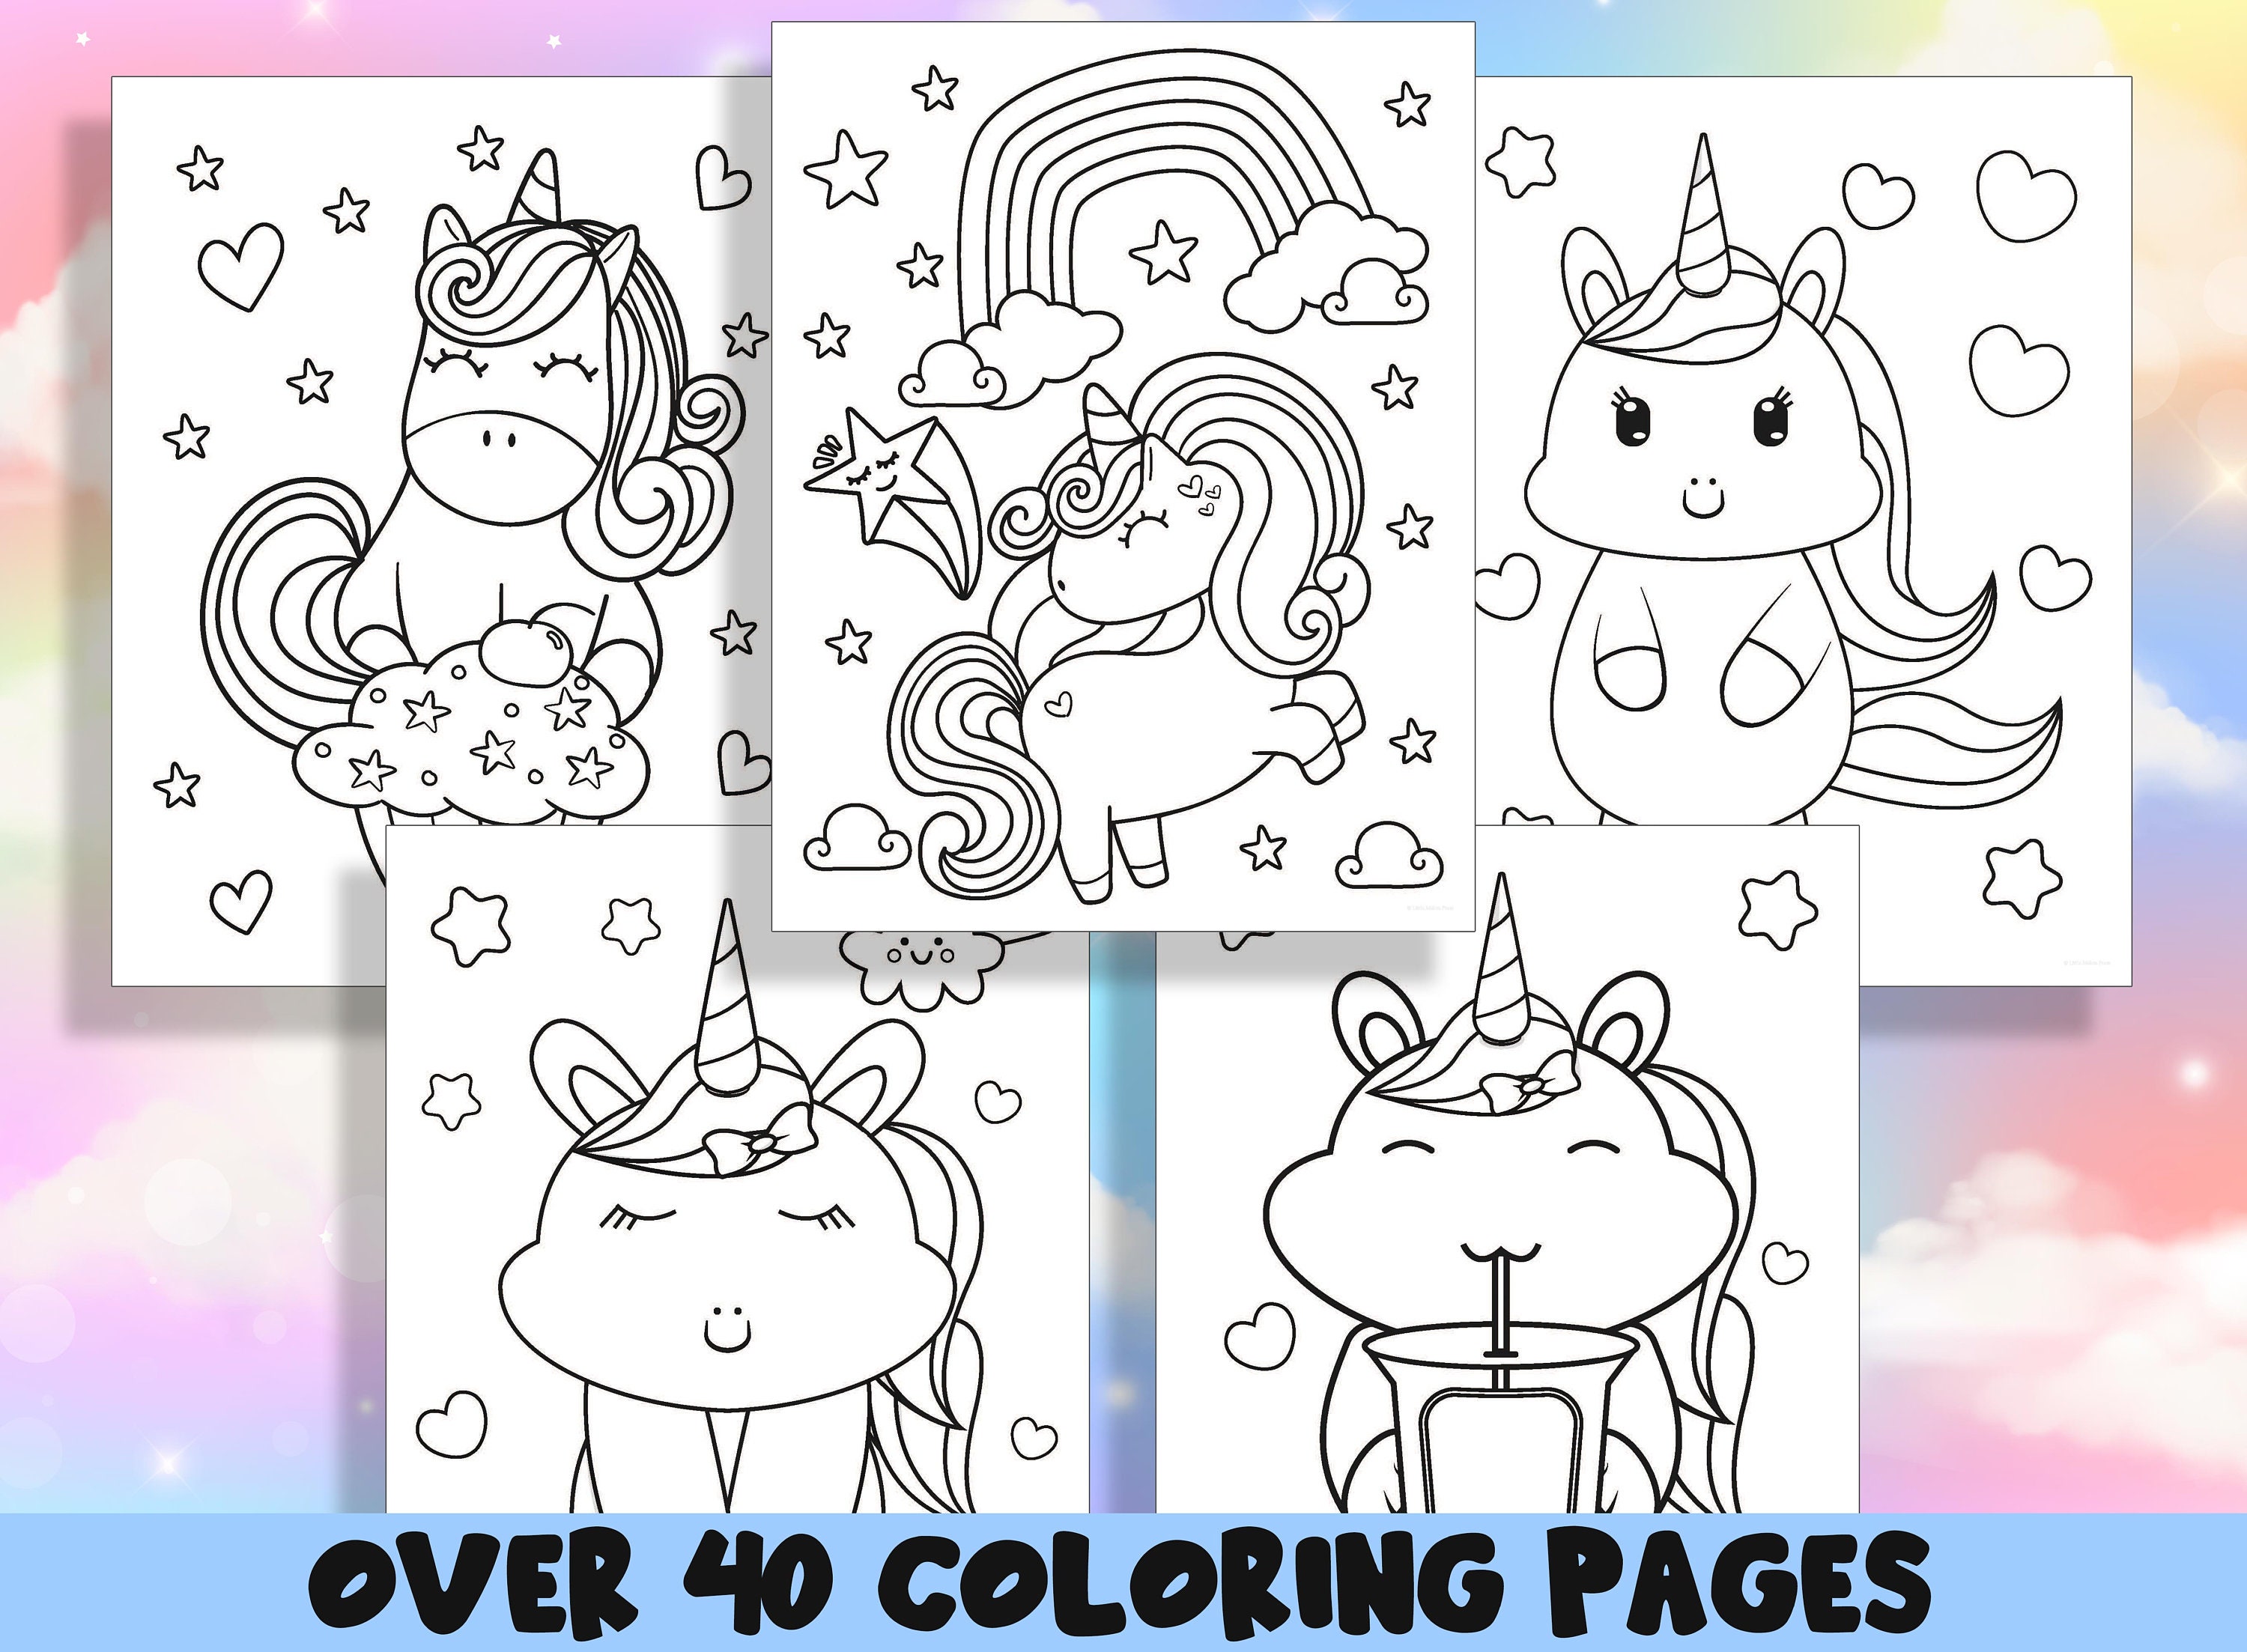 Yoytoo Unicorn Coloring Pads Kit for Girls, Unicorn Coloring Book with 60 Coloring Pages and 16 Colored Pencils for Drawing Painting, Travel